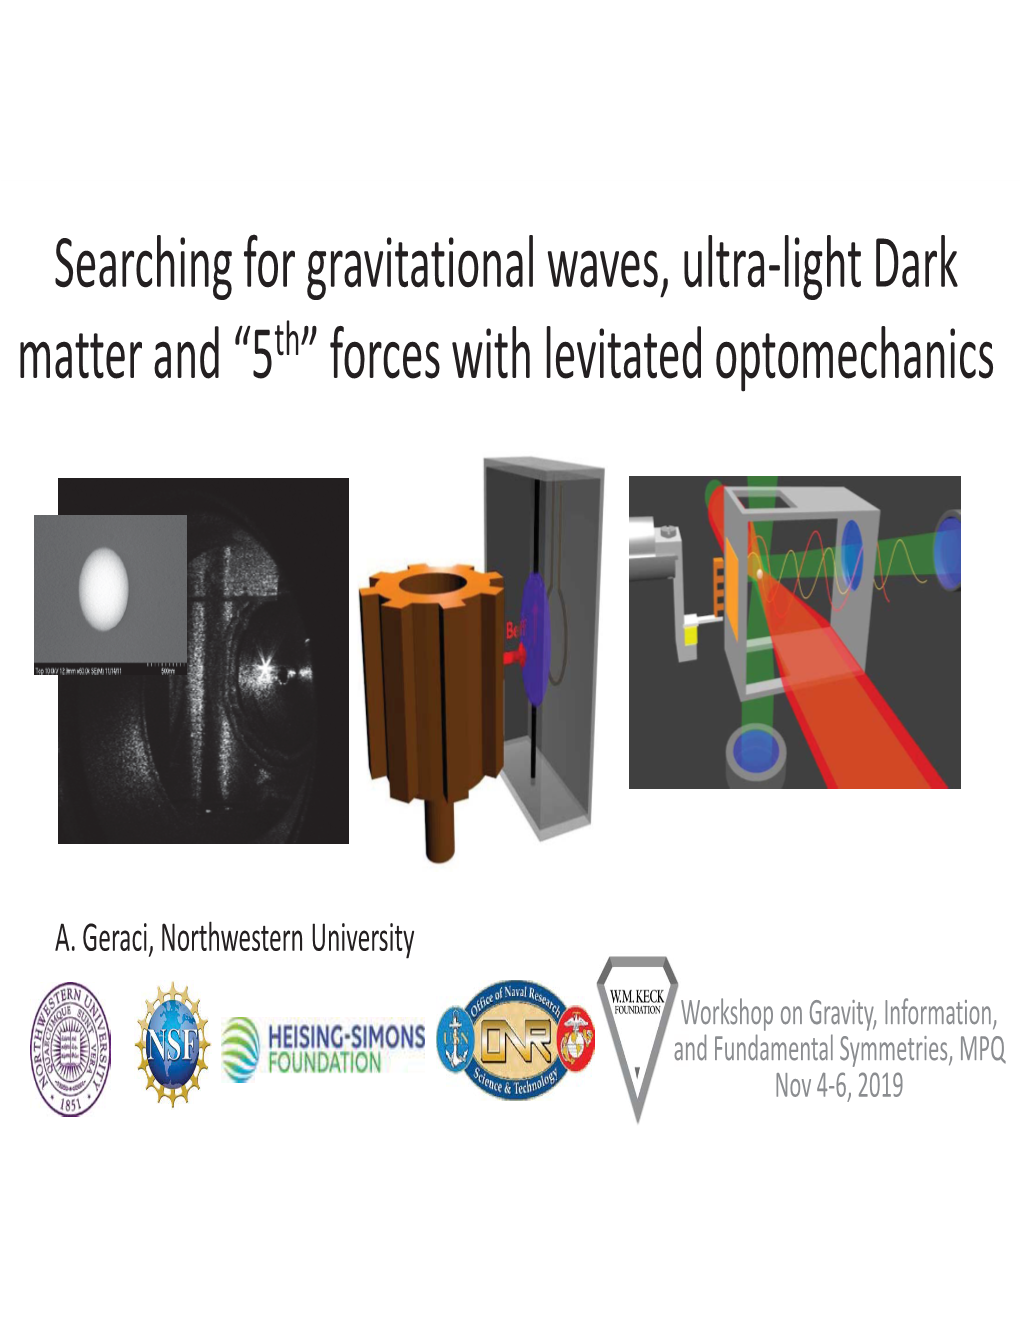 Searching for Gravitational Waves, Ultra-Light Dark Matter and “5Th” Forces with Levitated Optomechanics